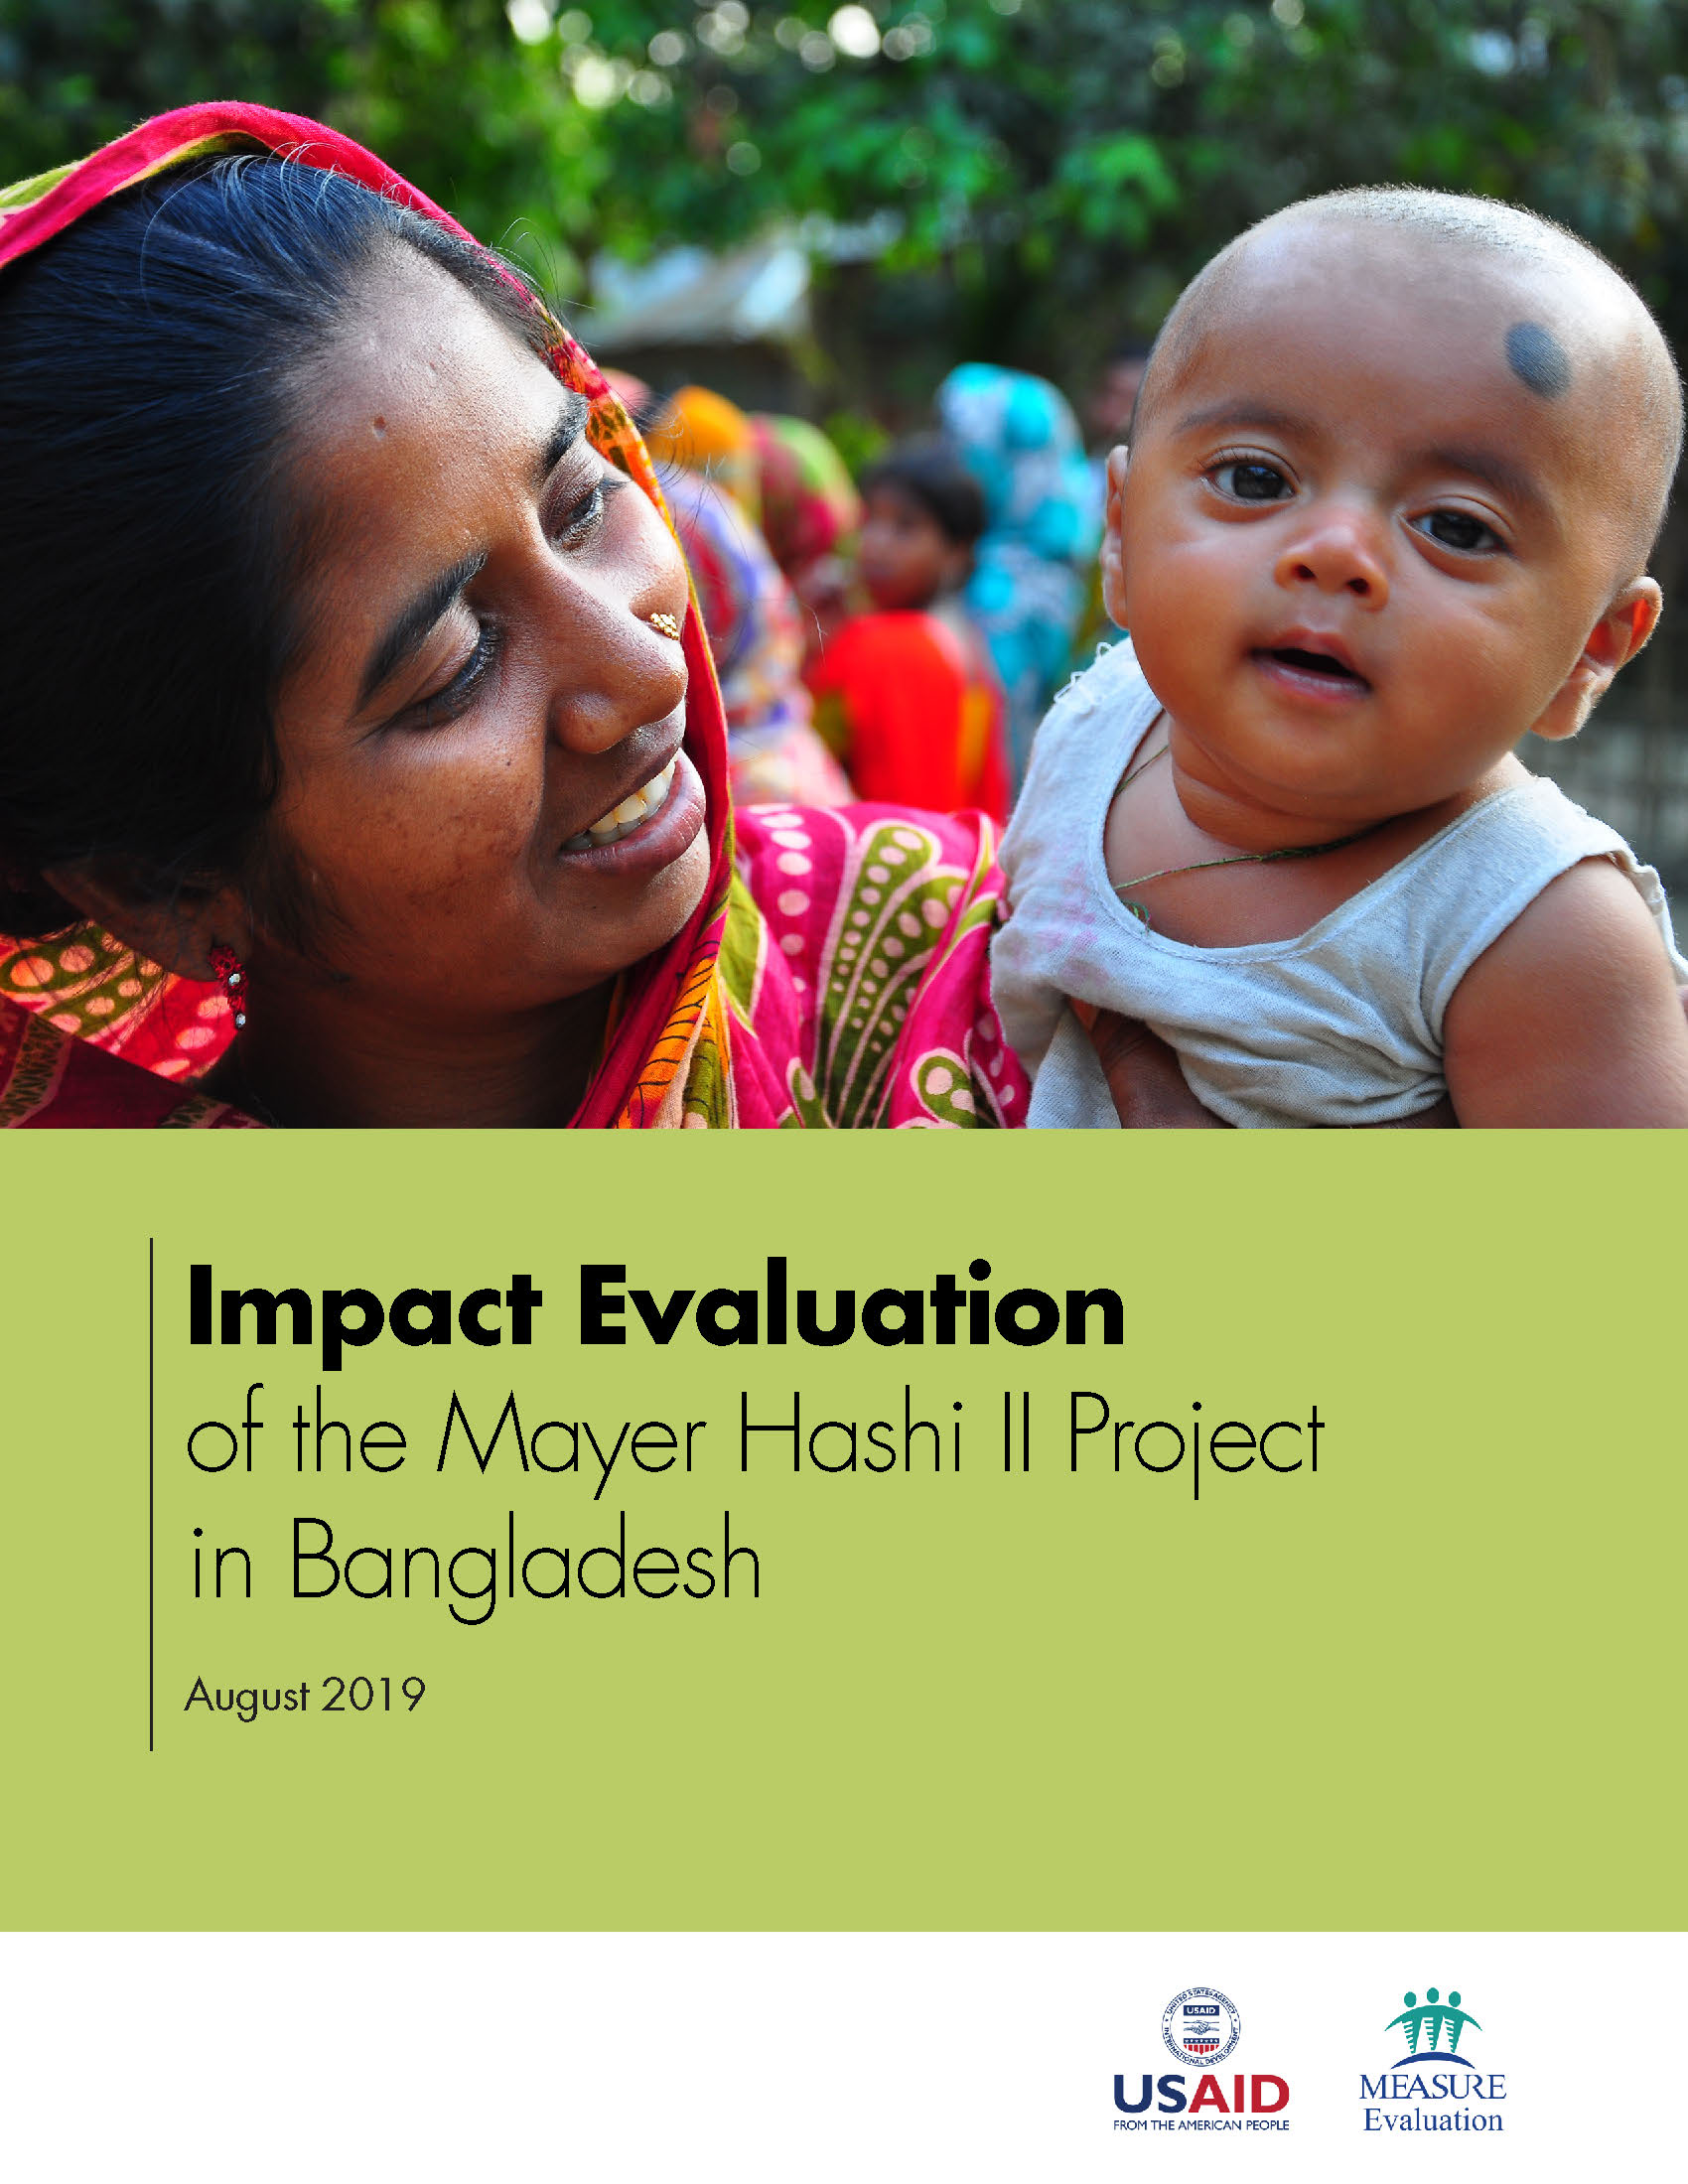 Impact Evaluation of the Mayer Hashi II Project in Bangladesh